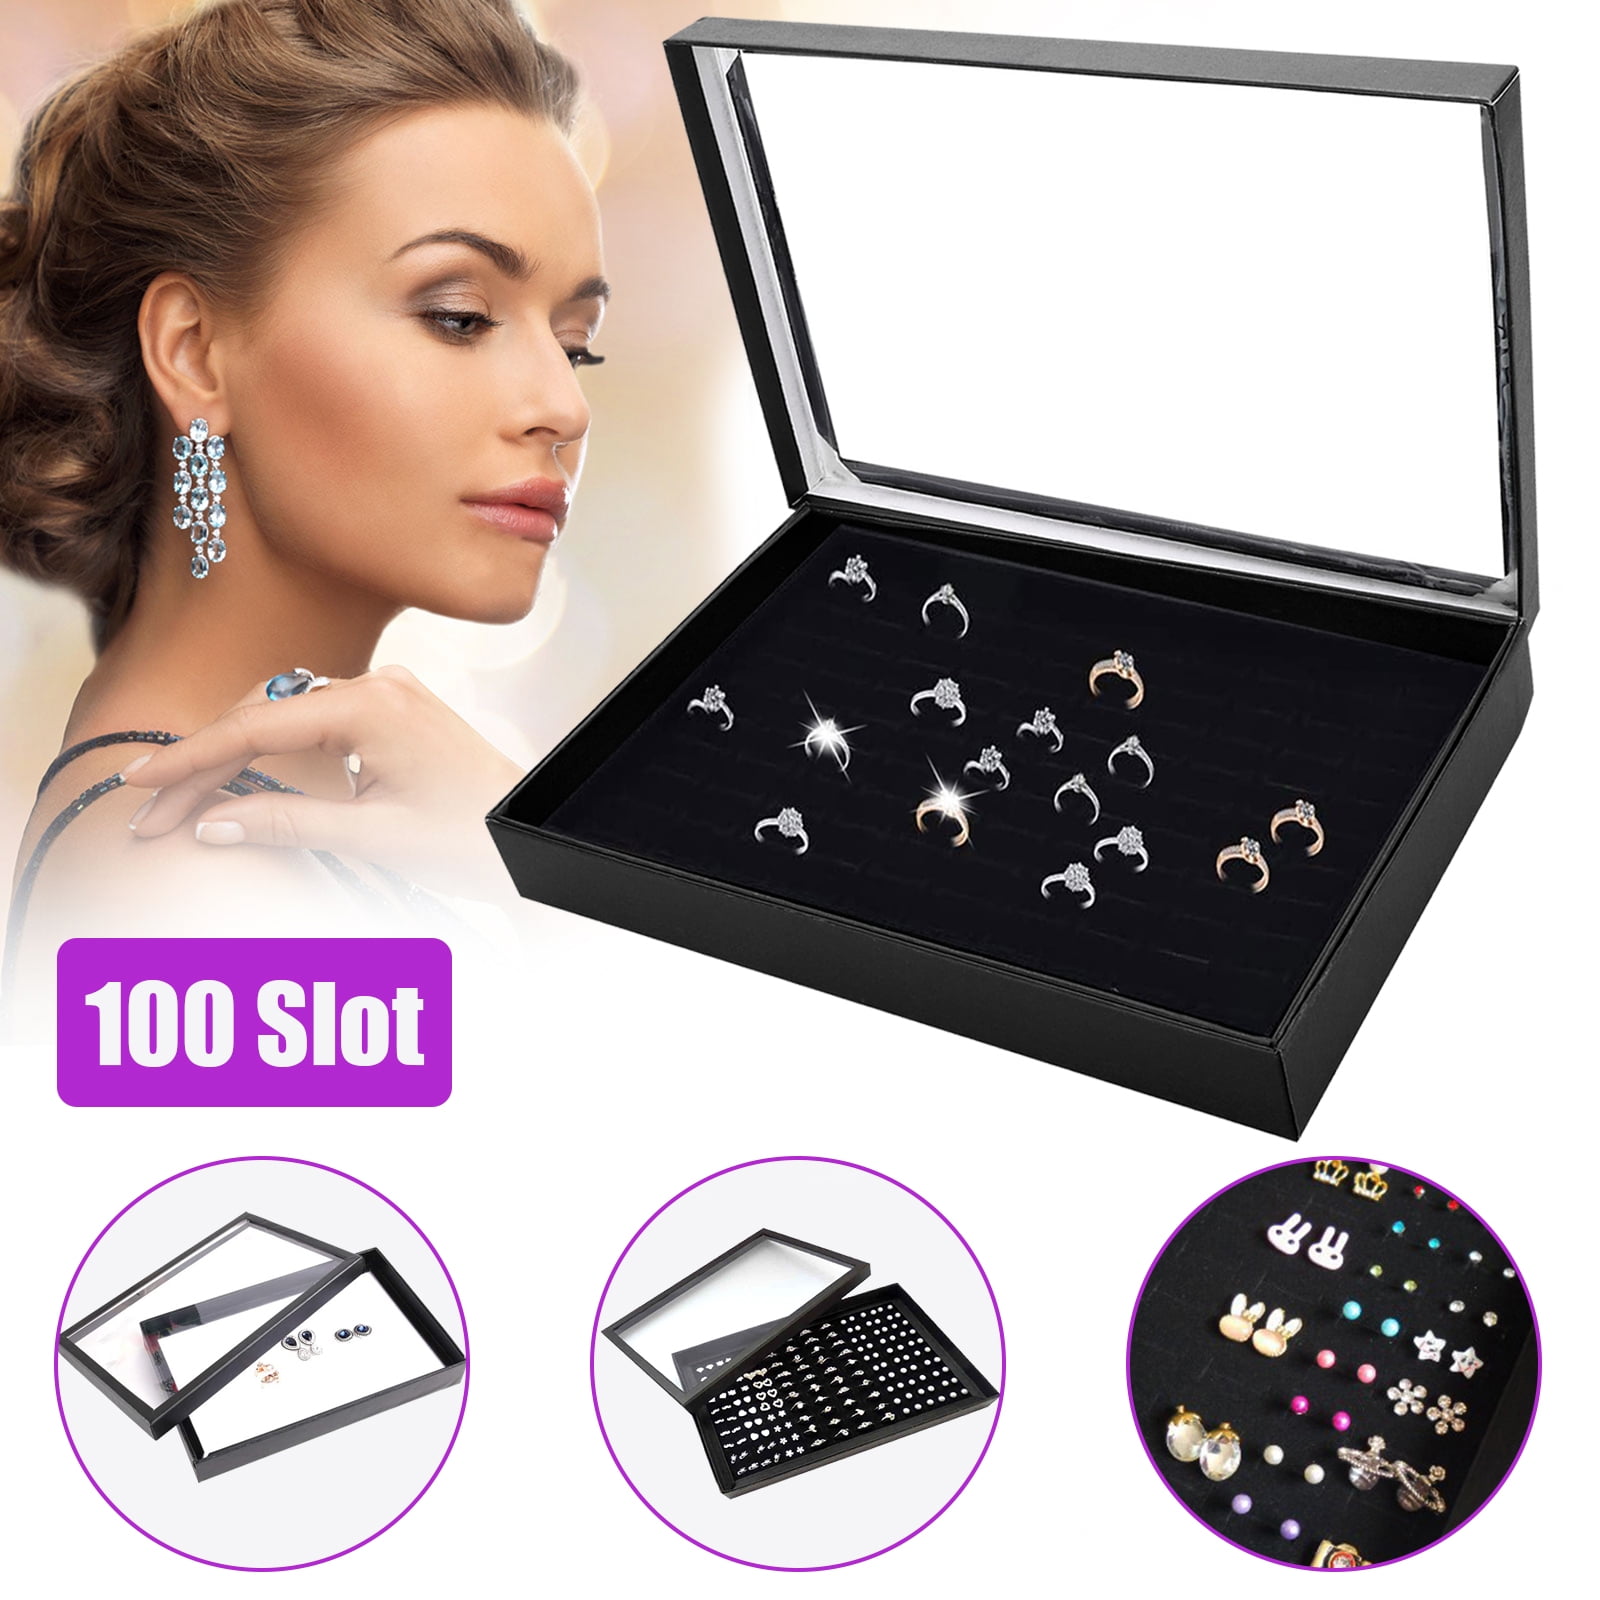 100 Slots Jewelry Earring Ring Display Organizer Box Tray Holder Storage Case ZH 